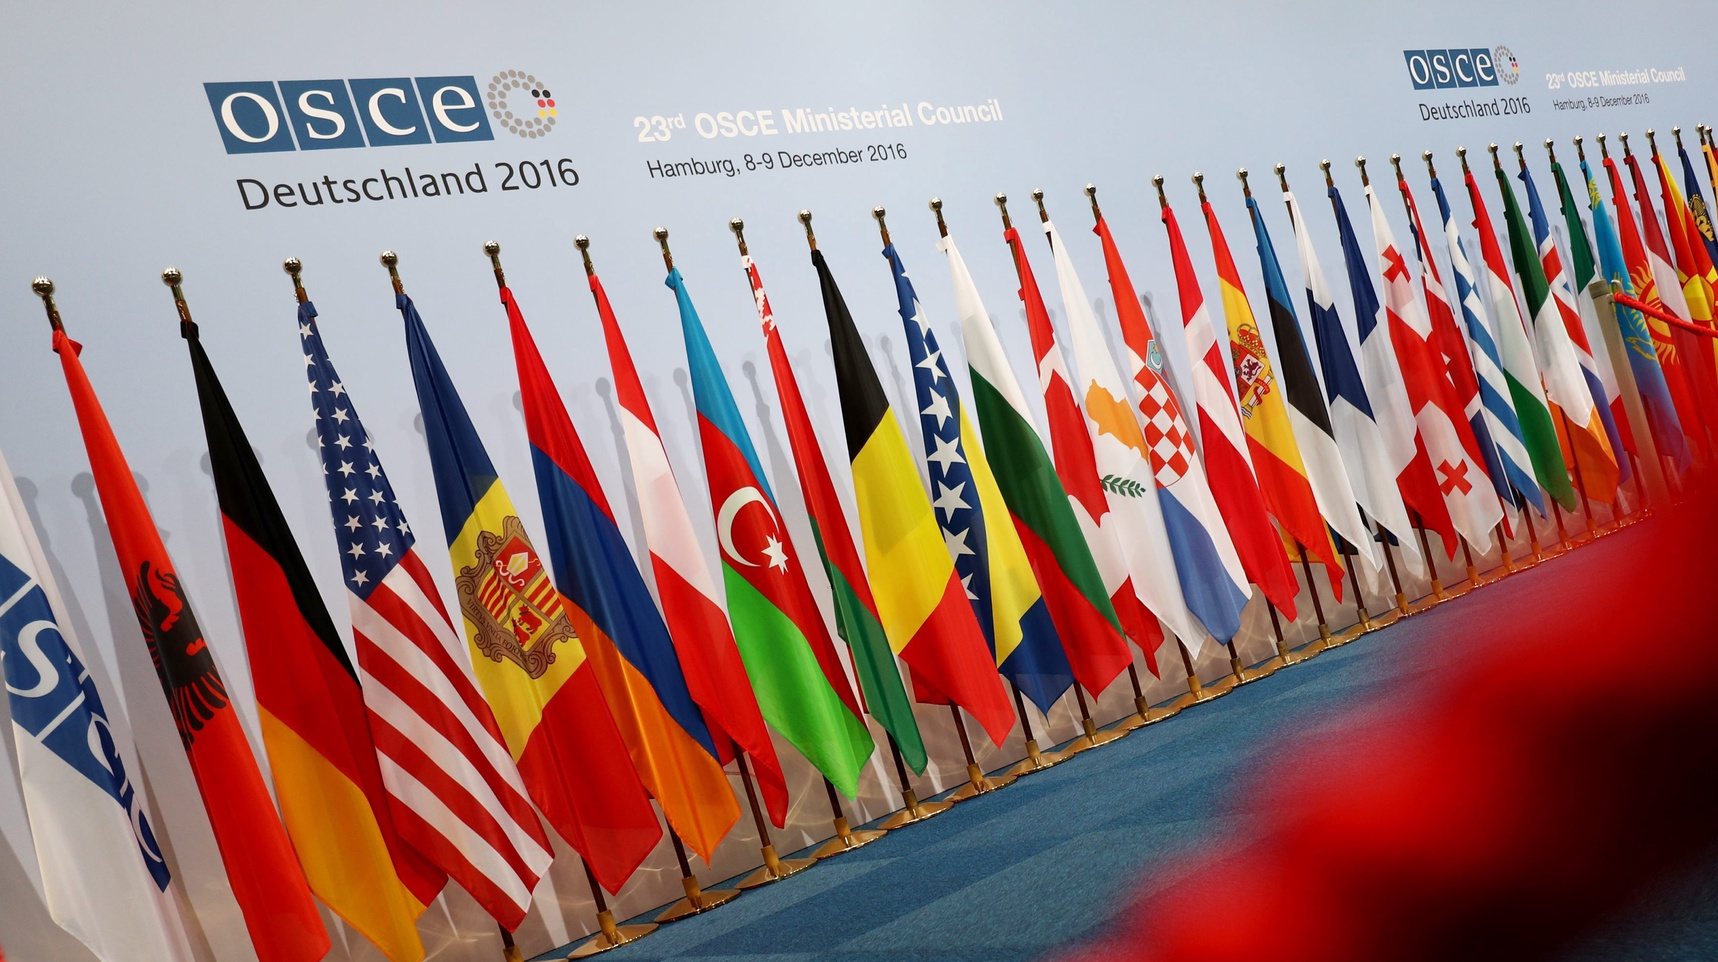 epa05663644 Flags of the OSCE member states set up in the media centre at the exhibition halls in Hamburg, Germany, 7 December 2016. According to the German foreign minsitry, 50 foreign ministers of the 57 OSCE member states have registered for the conference of the OSCE council of ministers on 8 and 9 December.  EPA/Christian Charisius